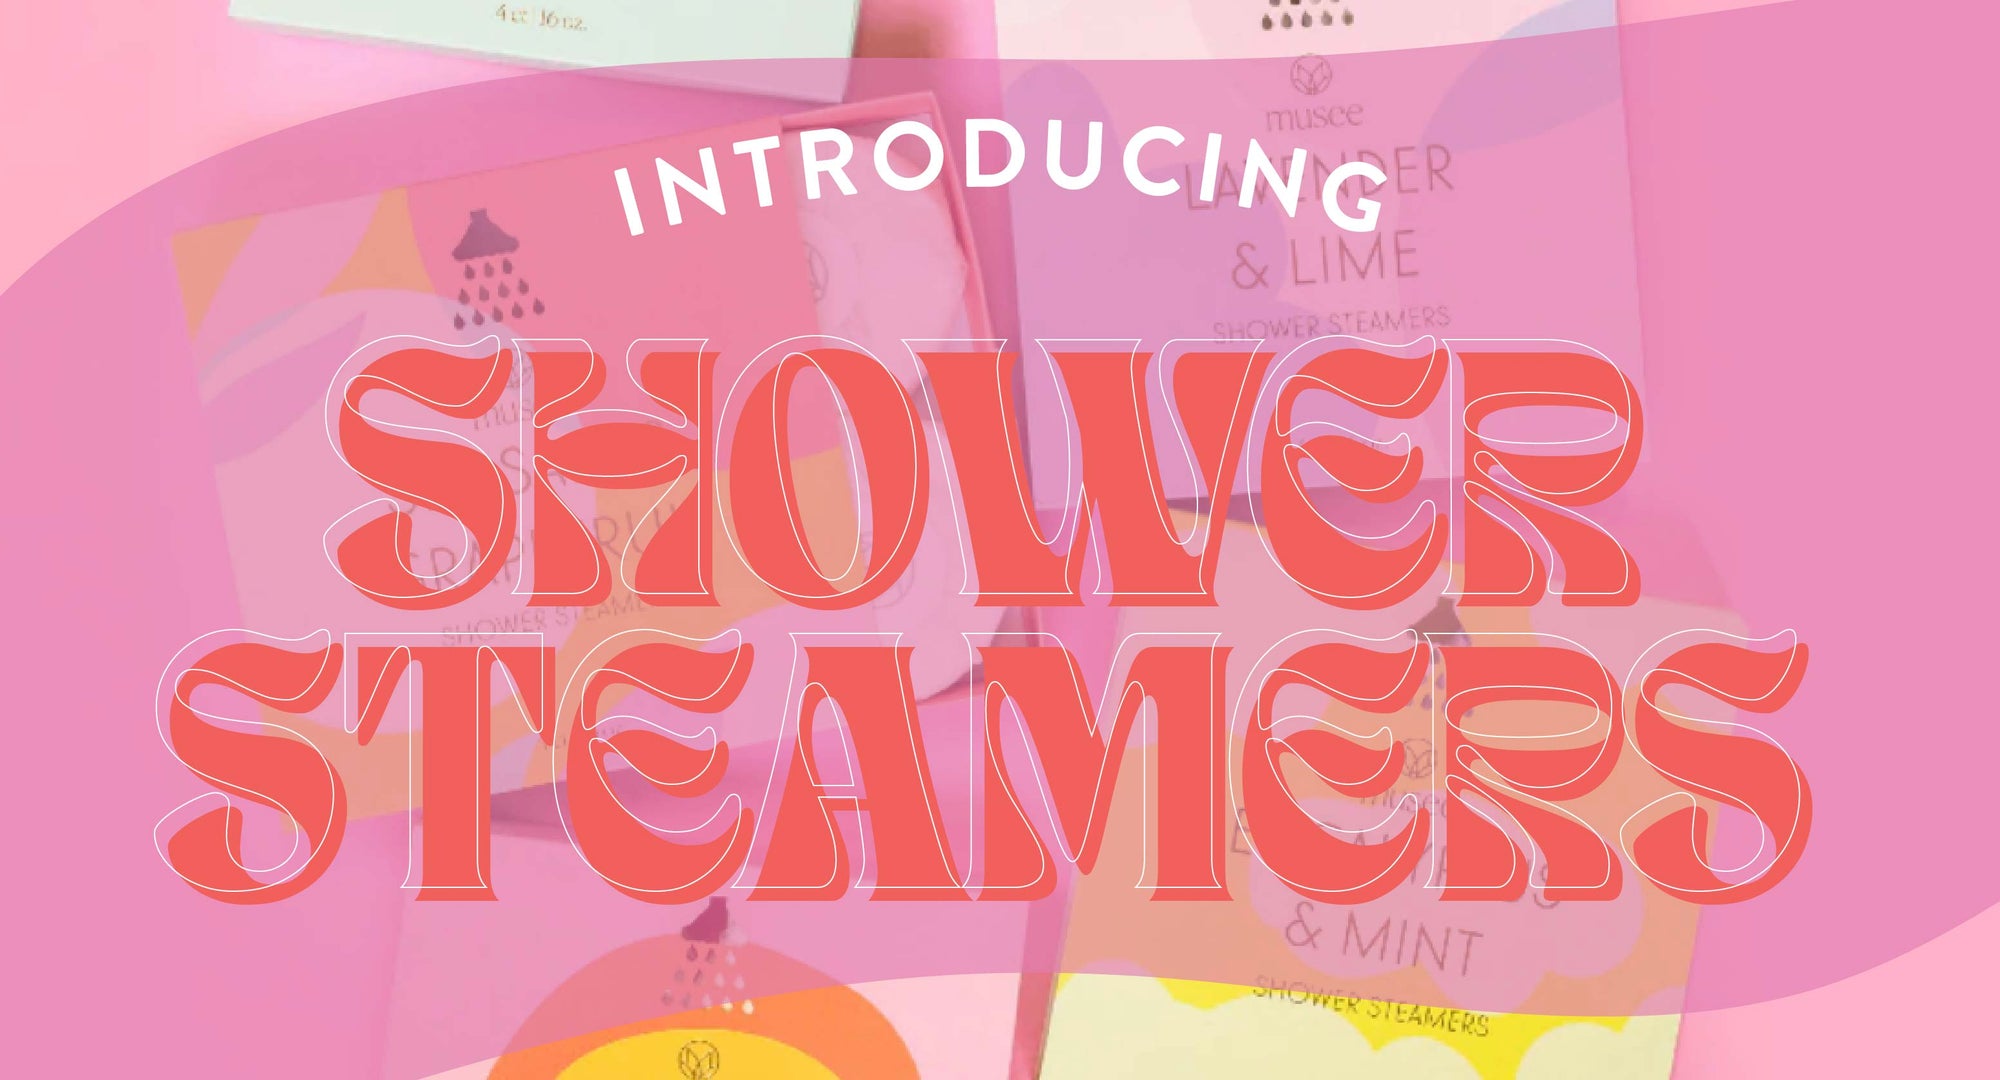 New Product Spotlight: Shower Steamers